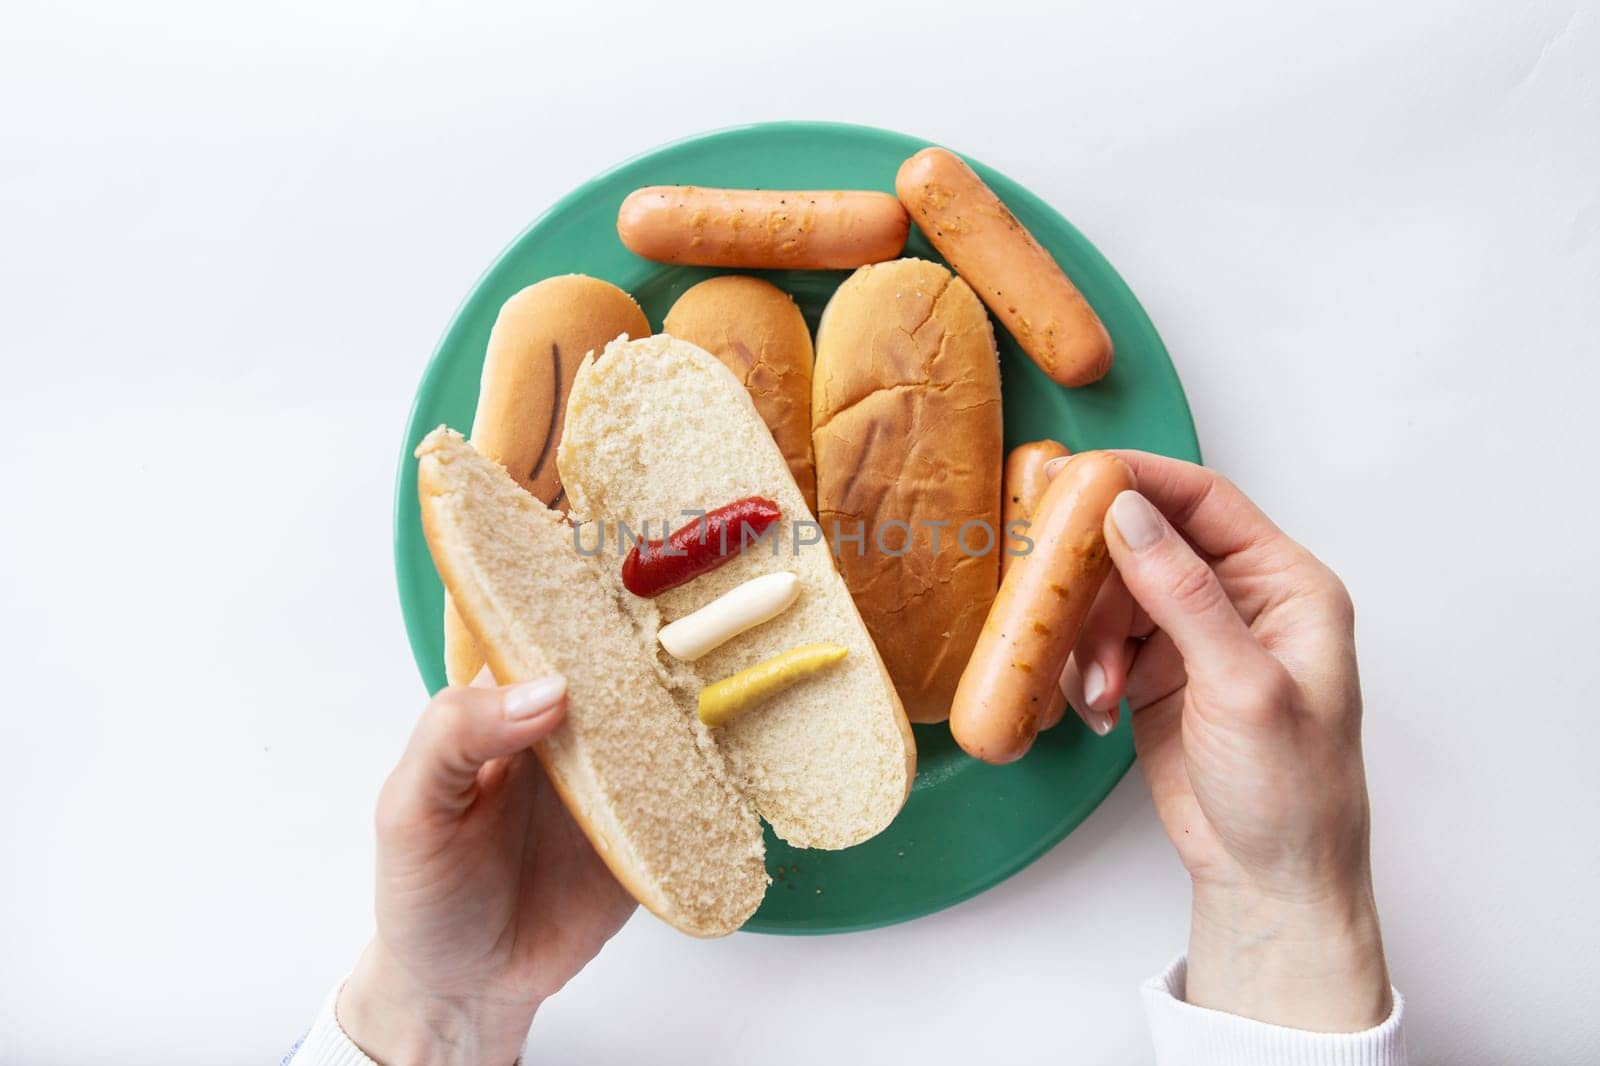 Fresh hot dog buns which lie on a green plate along with sausages. The girl holds in her hands a bun with sauces in which she puts a sausage. by sfinks